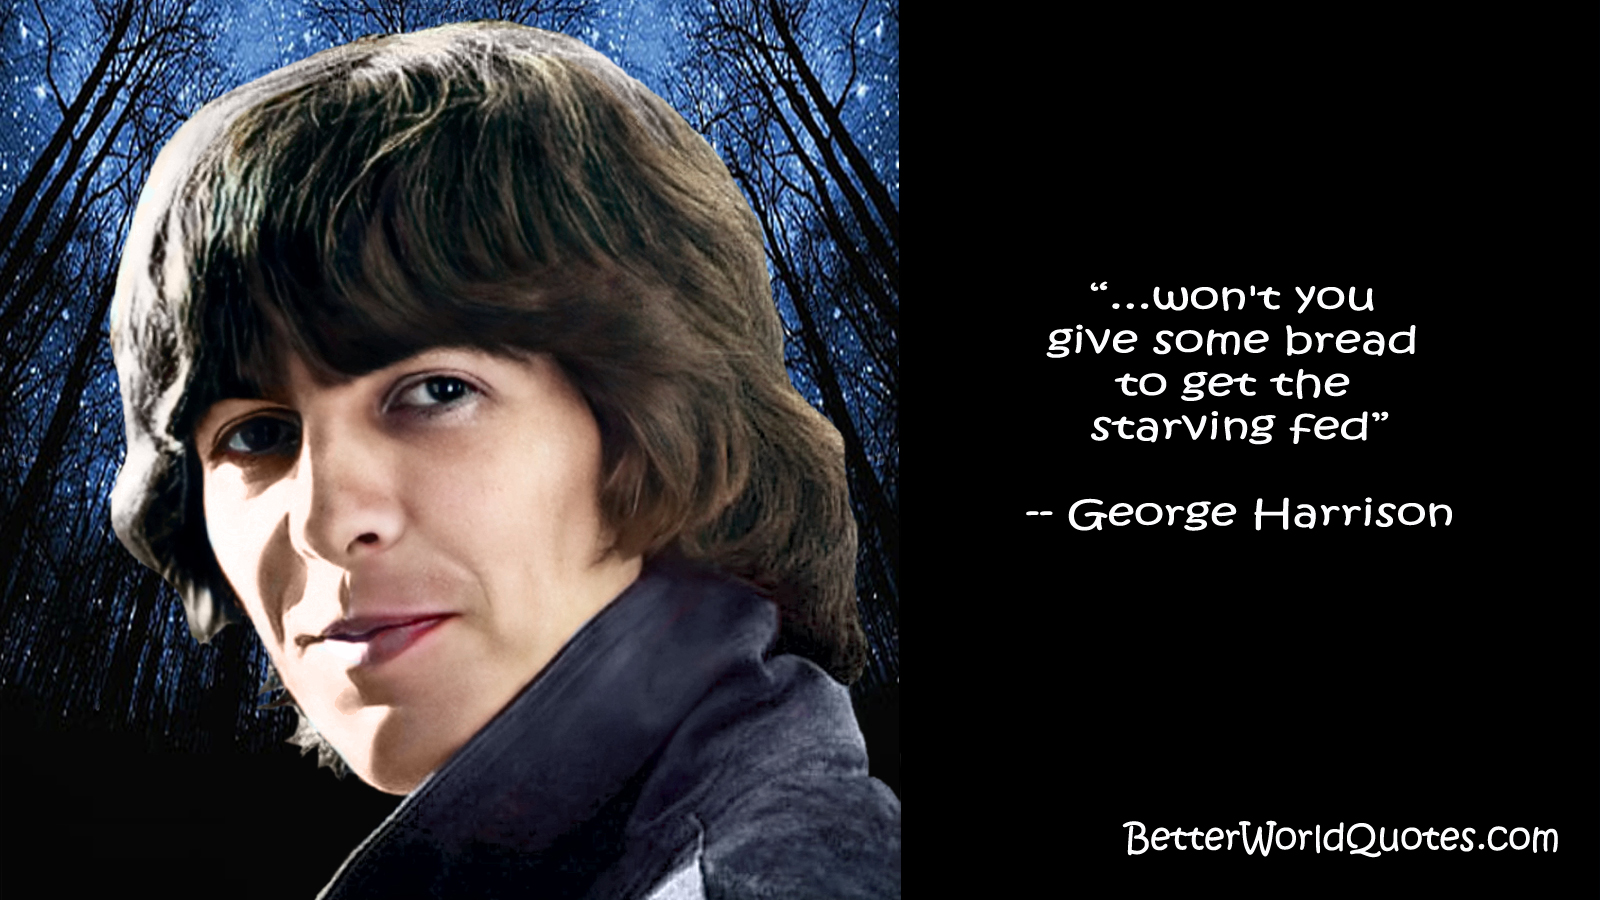 George Harrison: ...won't you give some bread to get the starving fed.